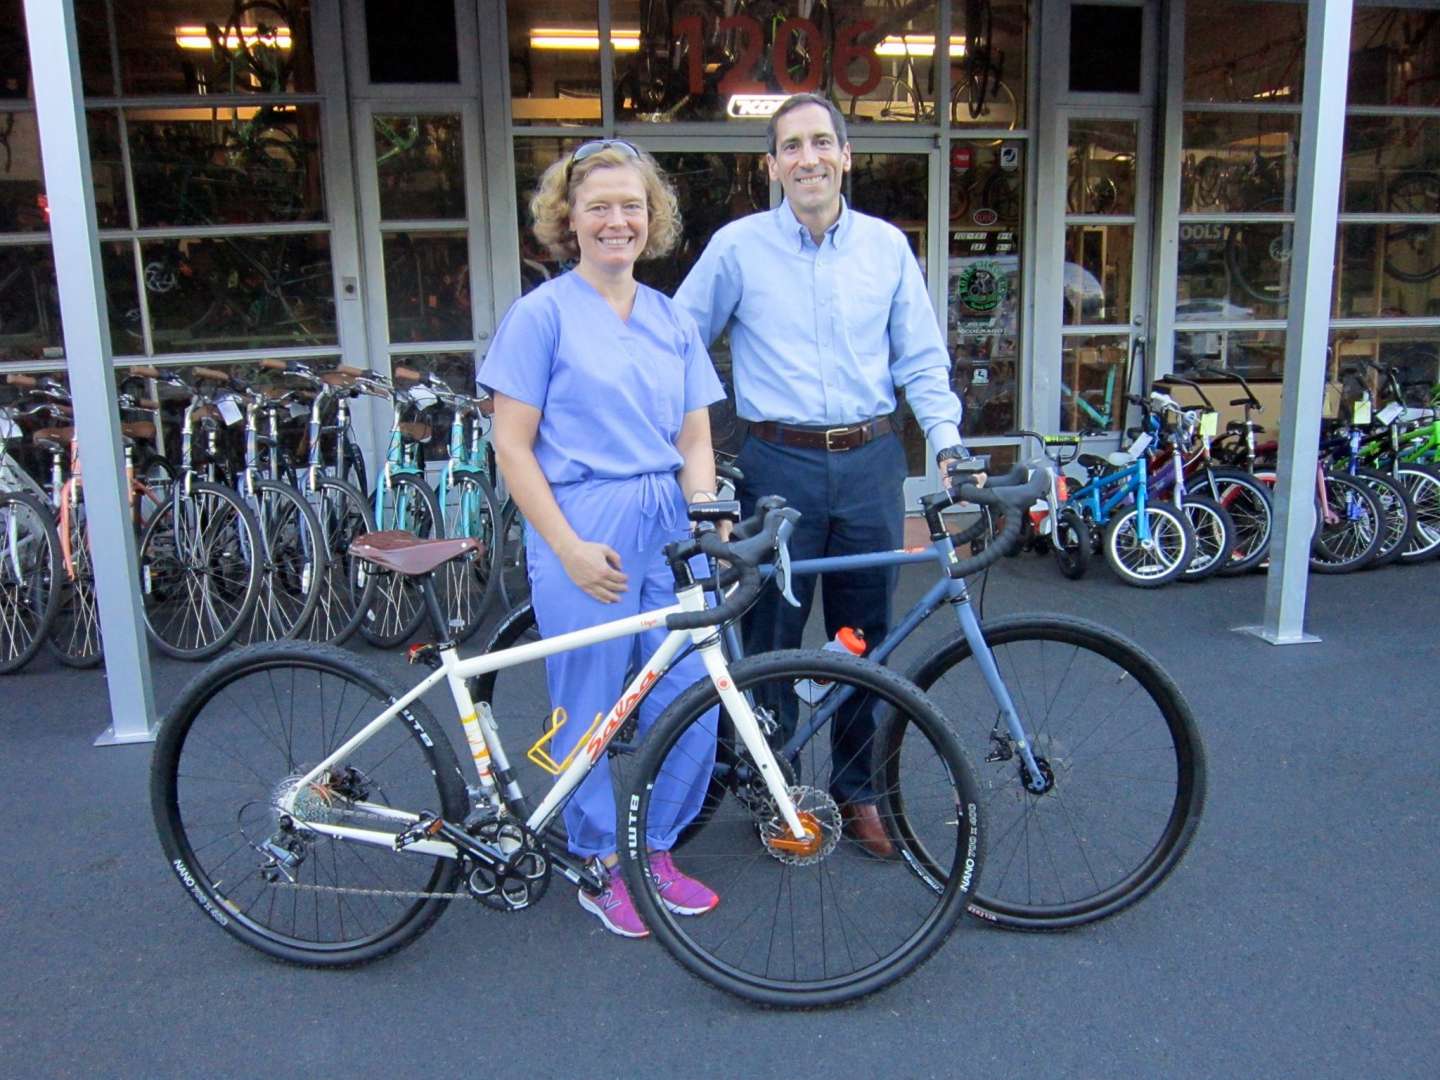 Bettina with her new Salsa Vaya and Shawn with his new Kona Rove ST.